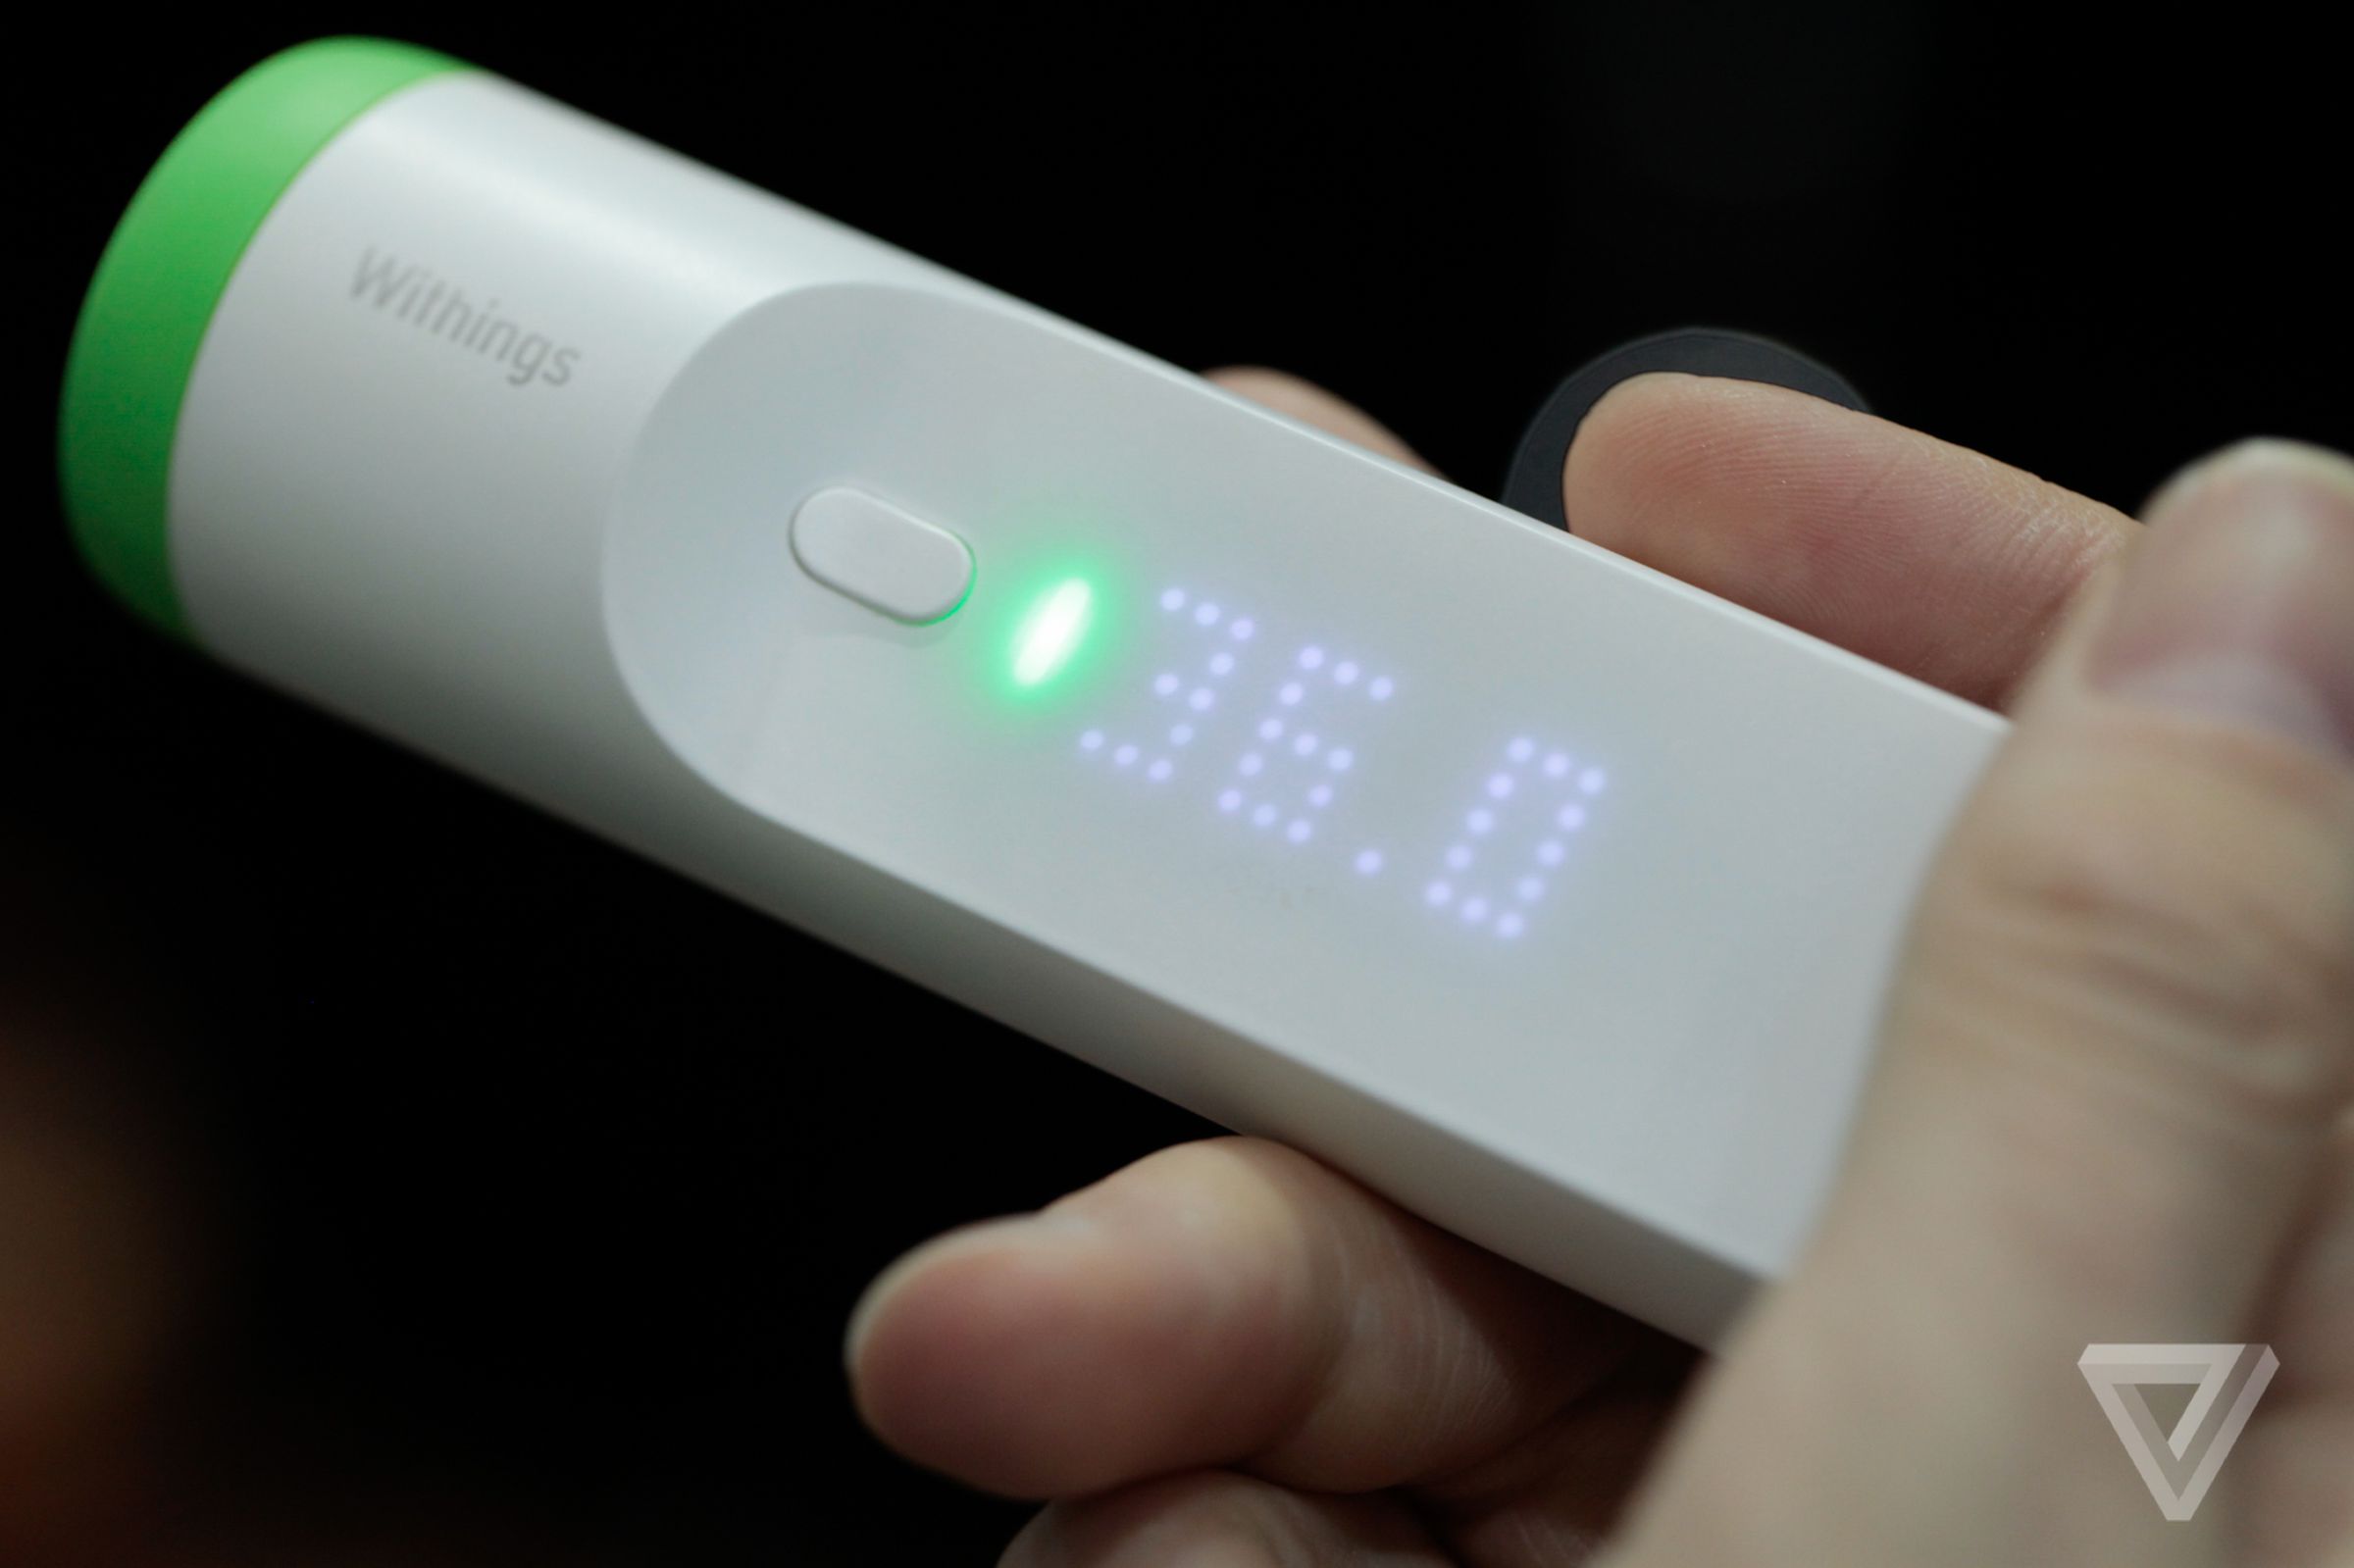 Withings Thermo smart thermometer